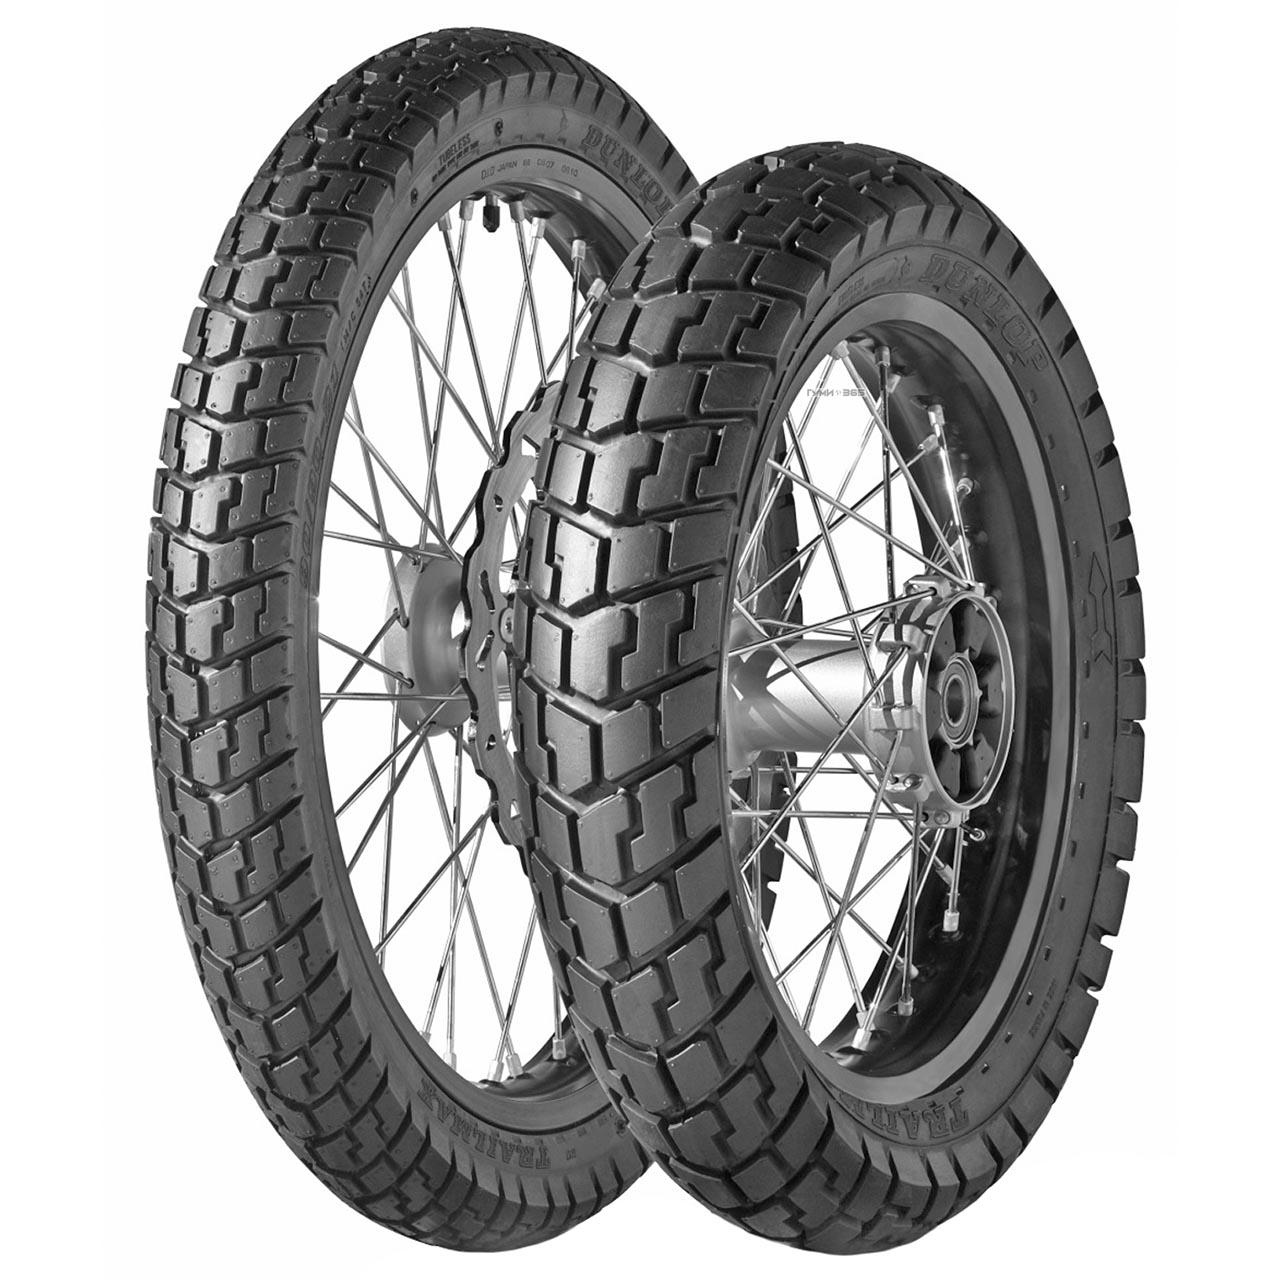 product_type-moto_tires DUNLOP TRAILMAX 120/90 R17 64S